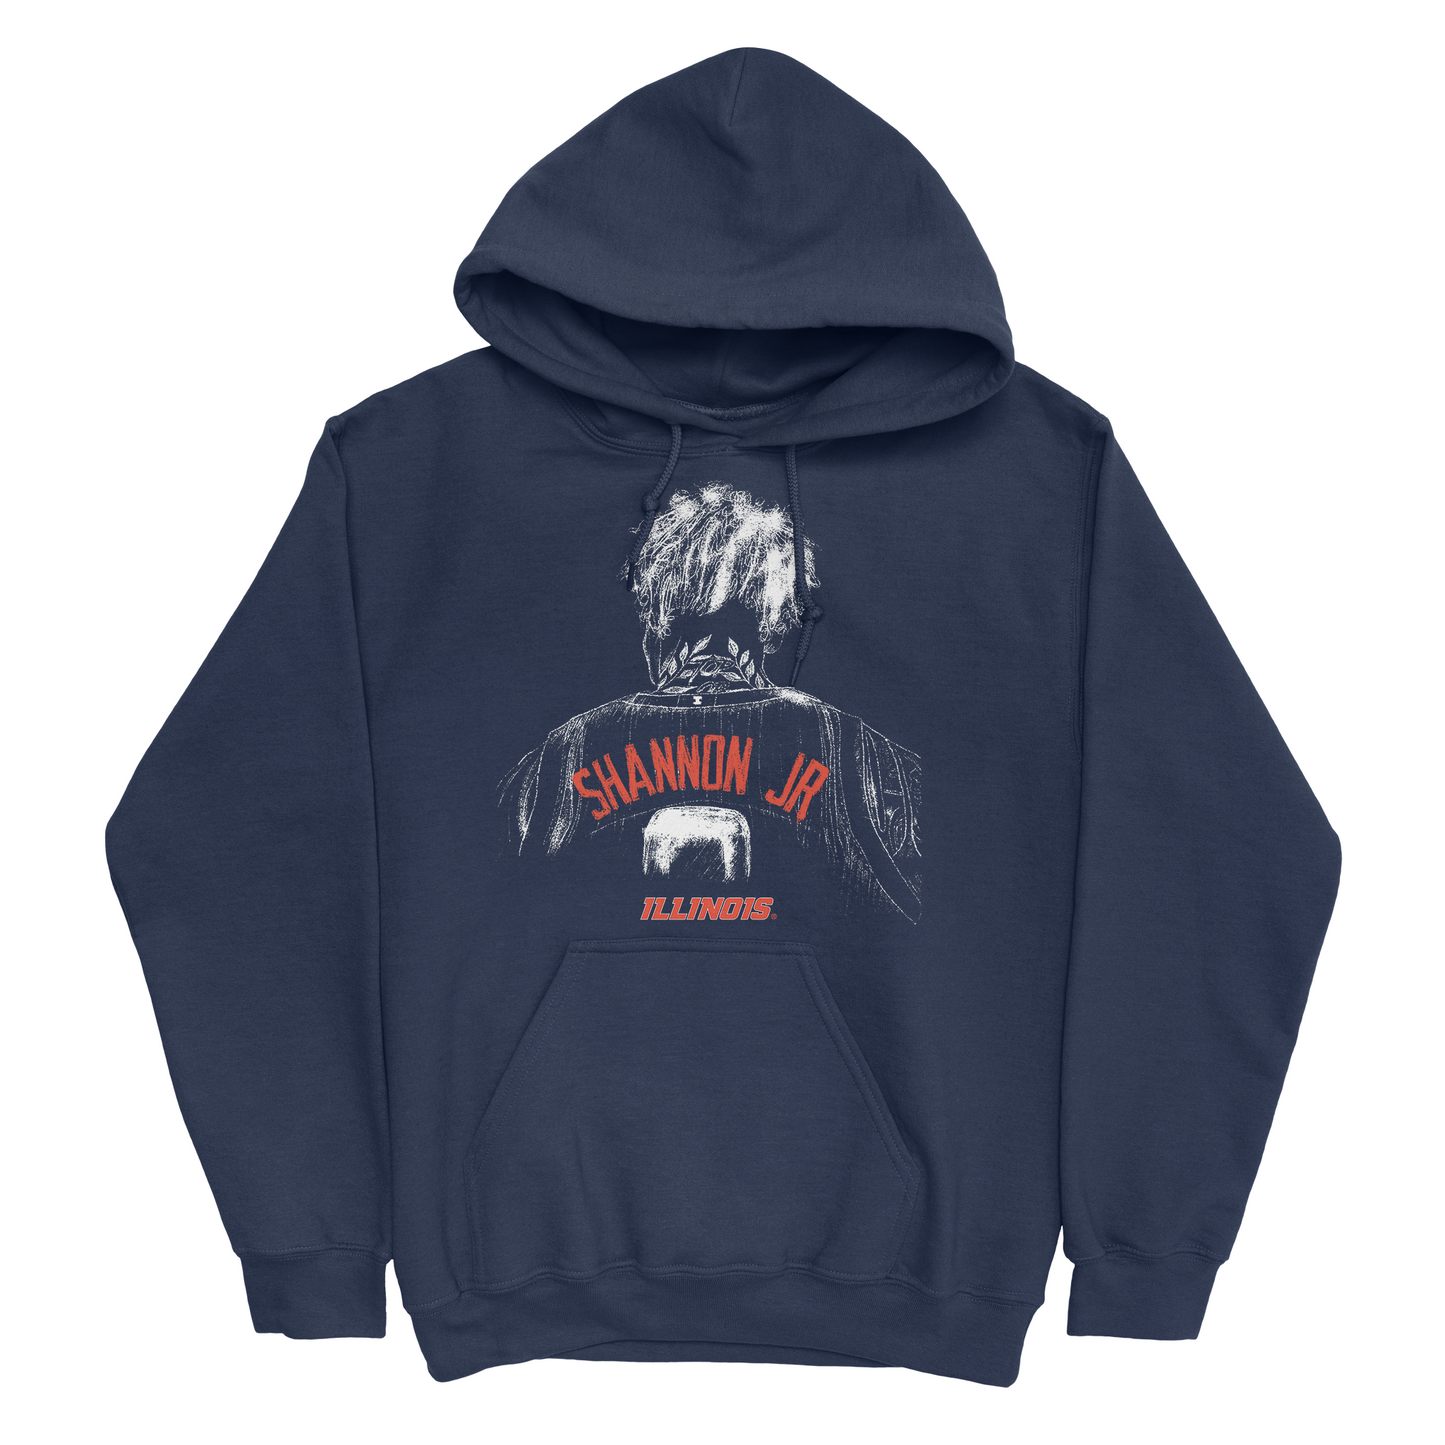 EXCLUSIVE RELEASE: Terrence Shannon Jr. Thank You Hoodie